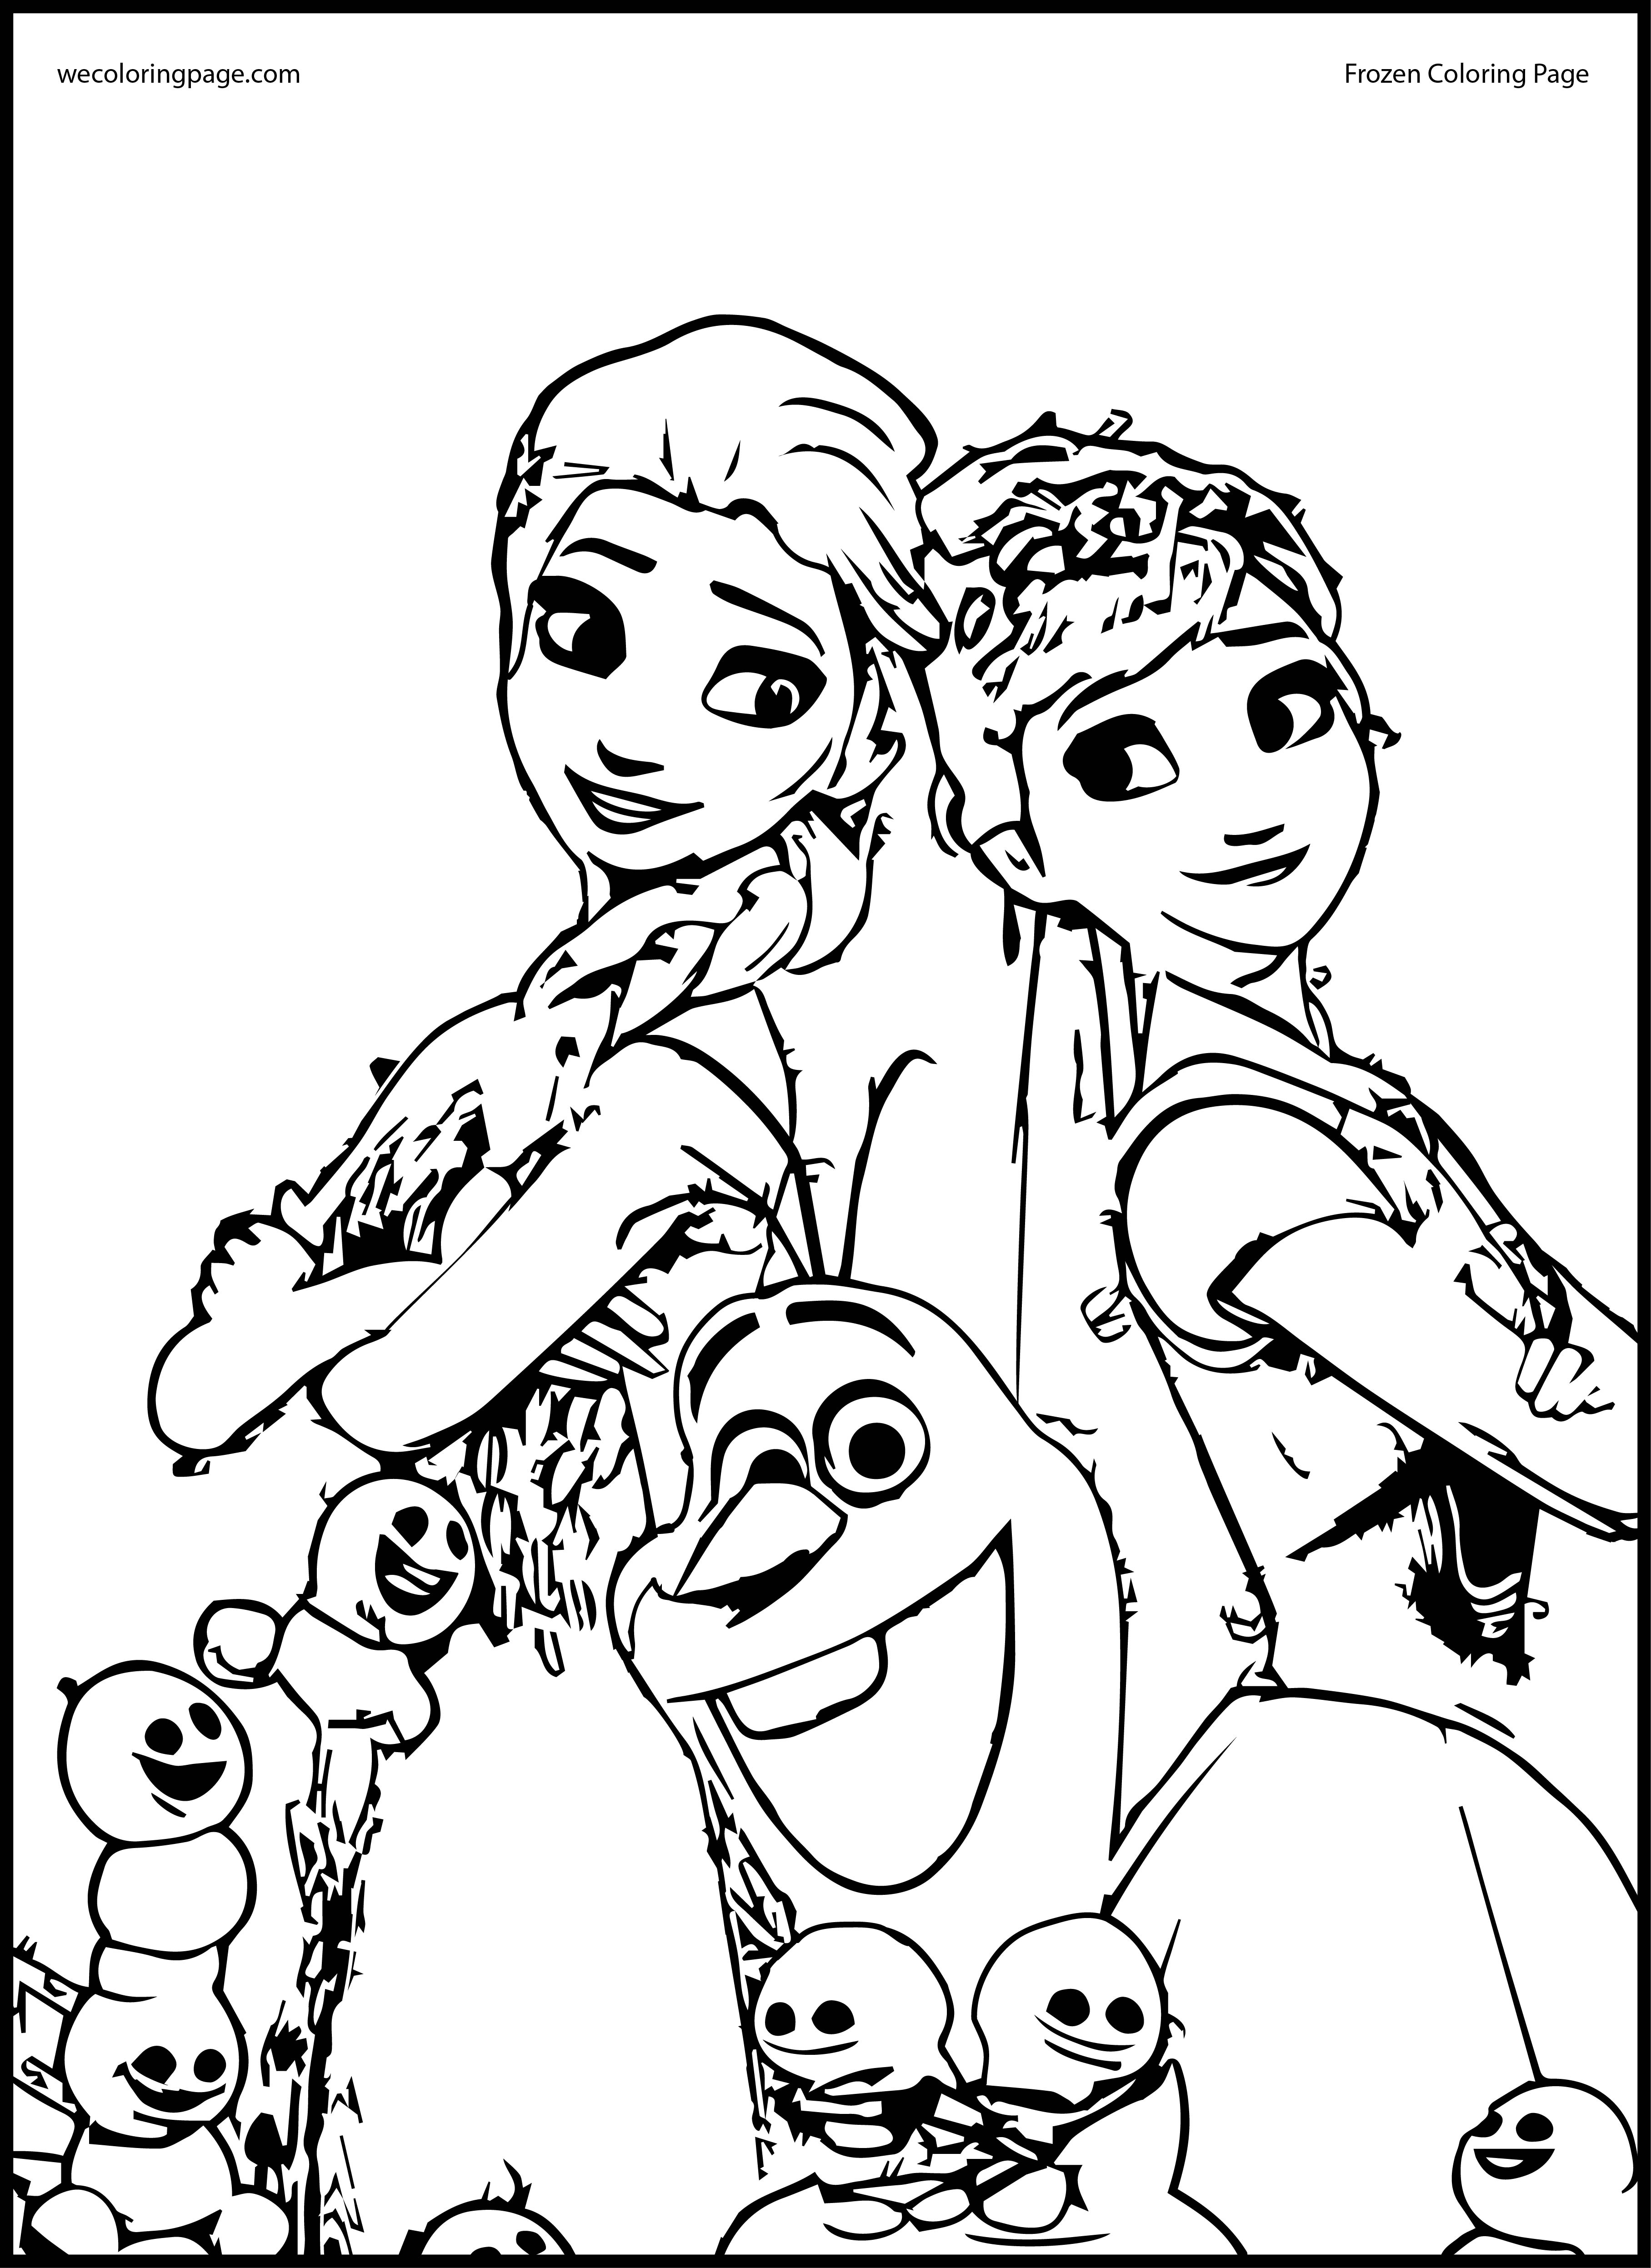 Frozen Fever Coloring Pages at Free printable